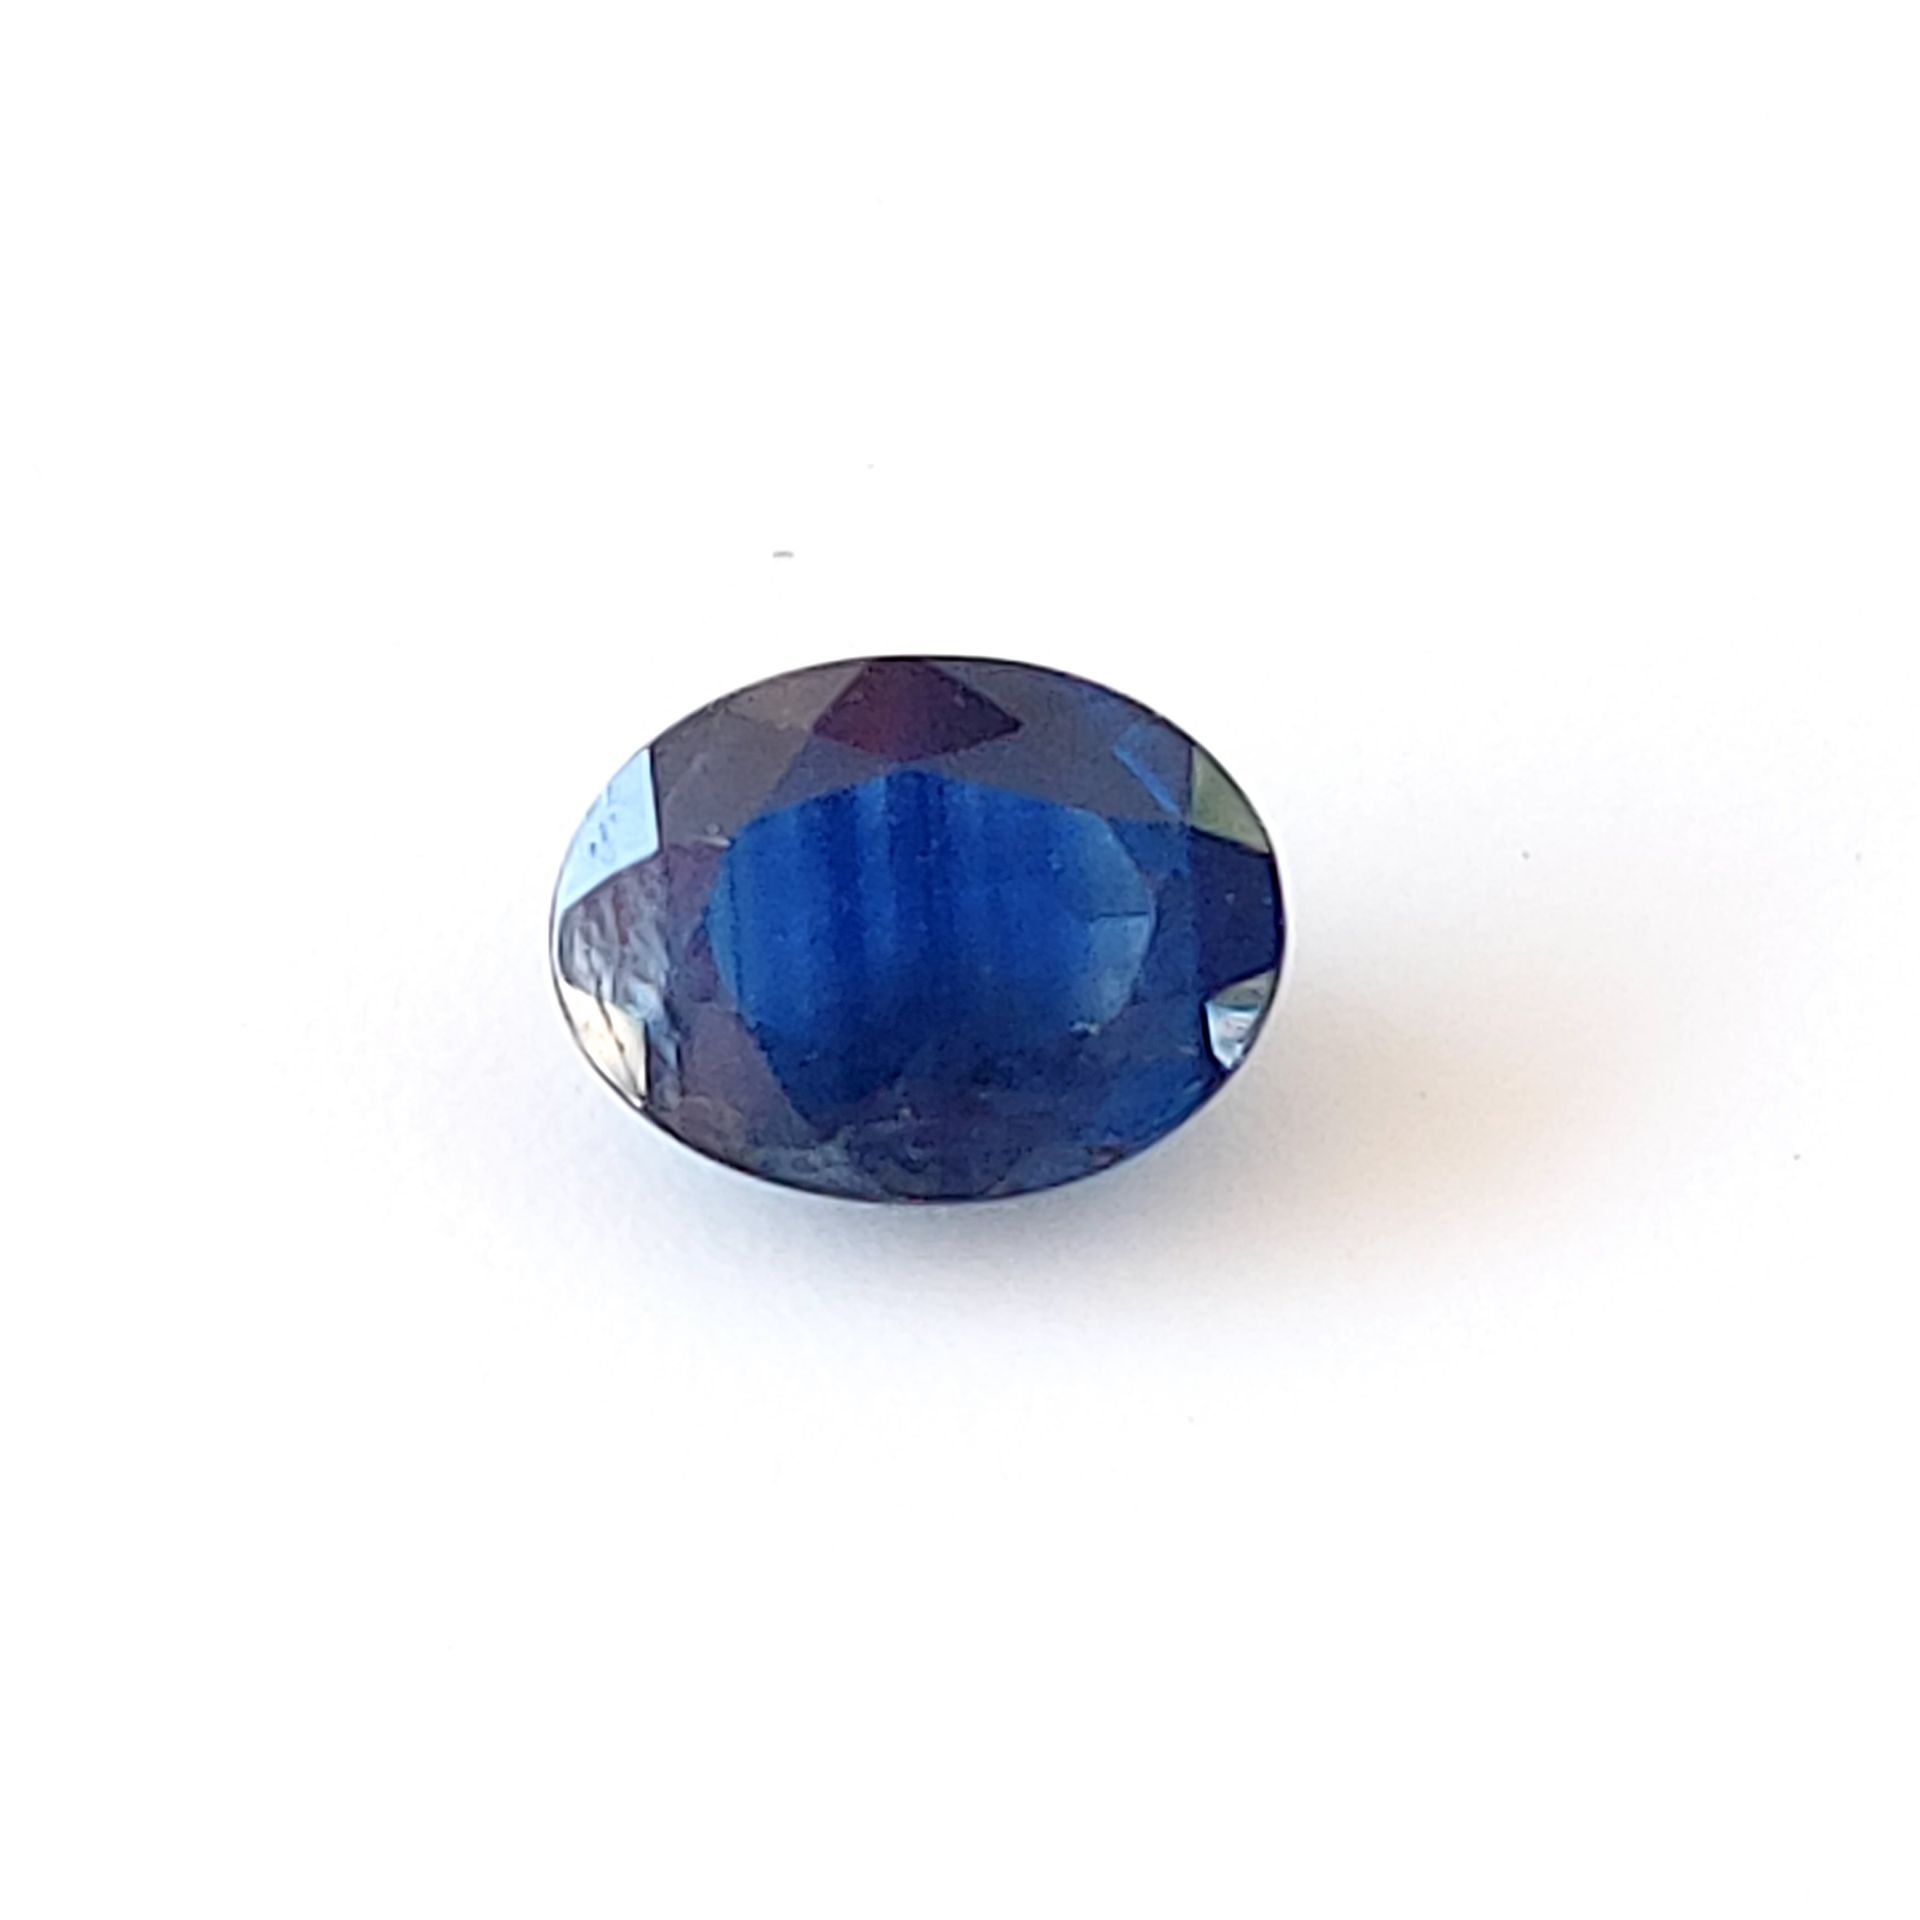 Null SAPHIR - From Thailand - Blue color - Transparent - Oval cut - Weight 1.60 &hellip;